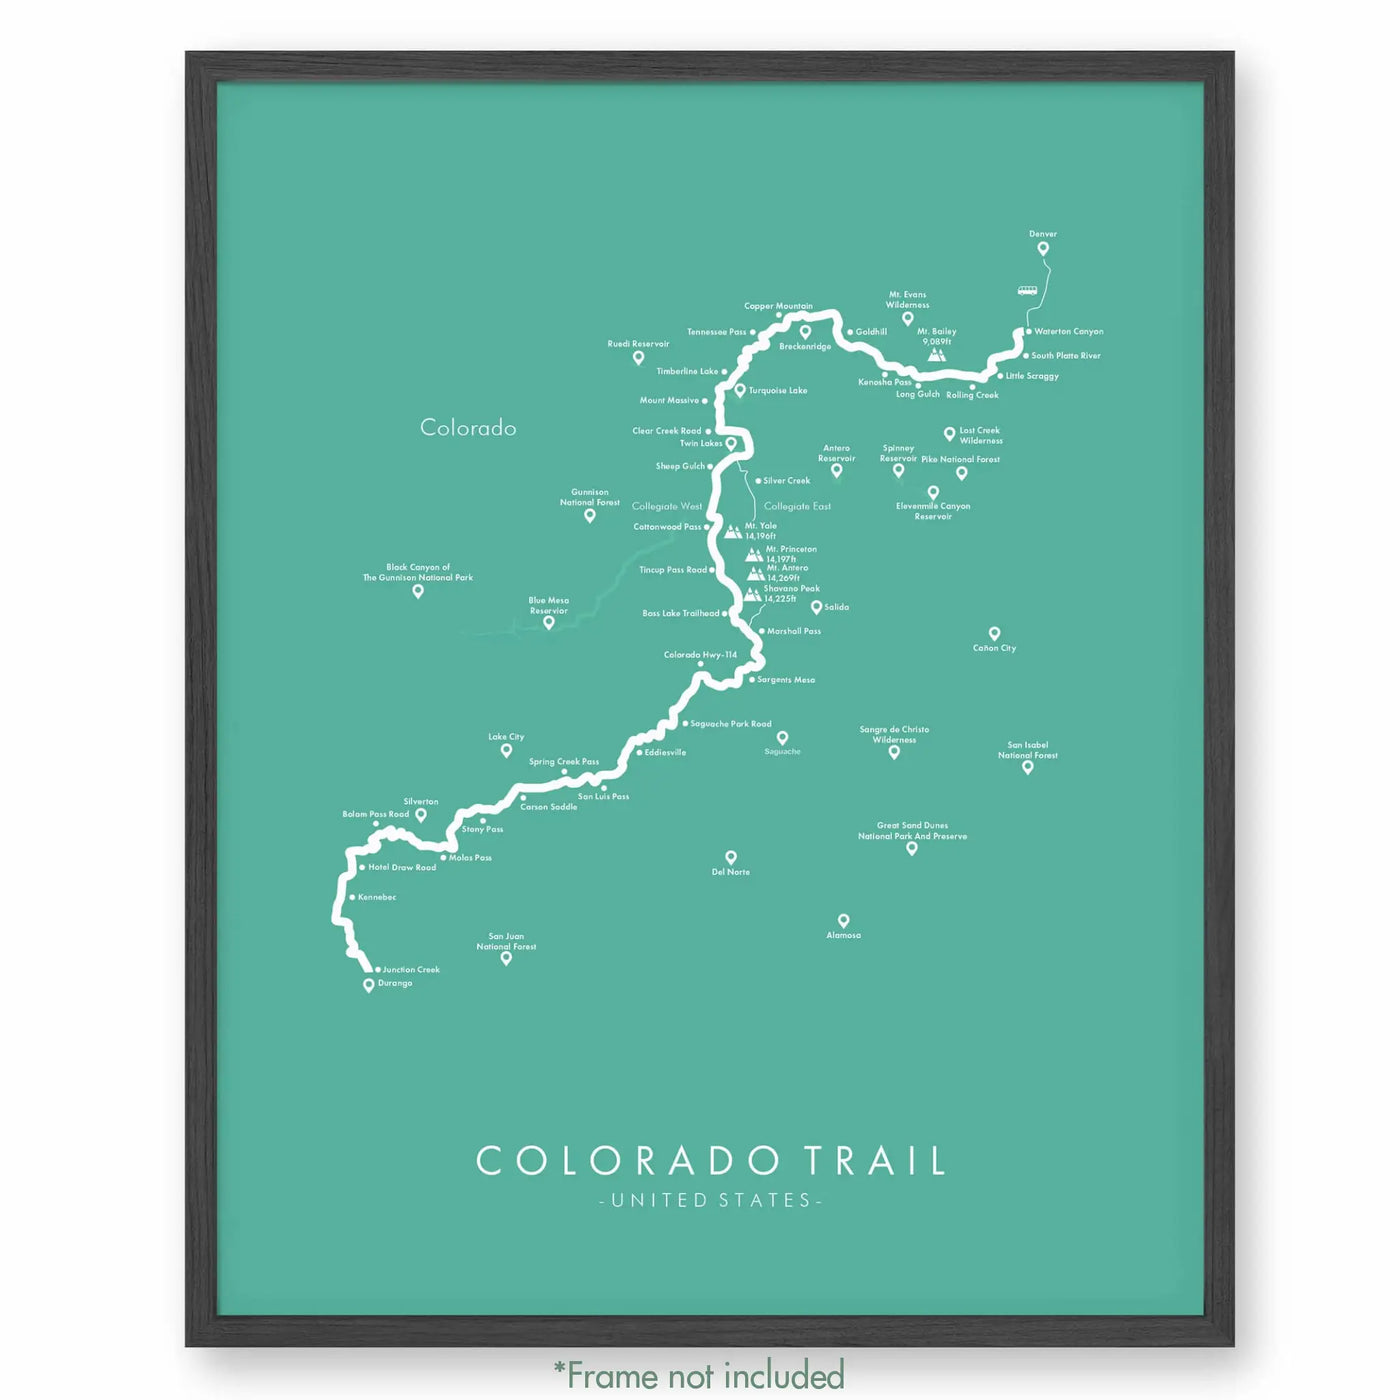 Trail Poster of Colorado Trail - West Collegiate - Teal